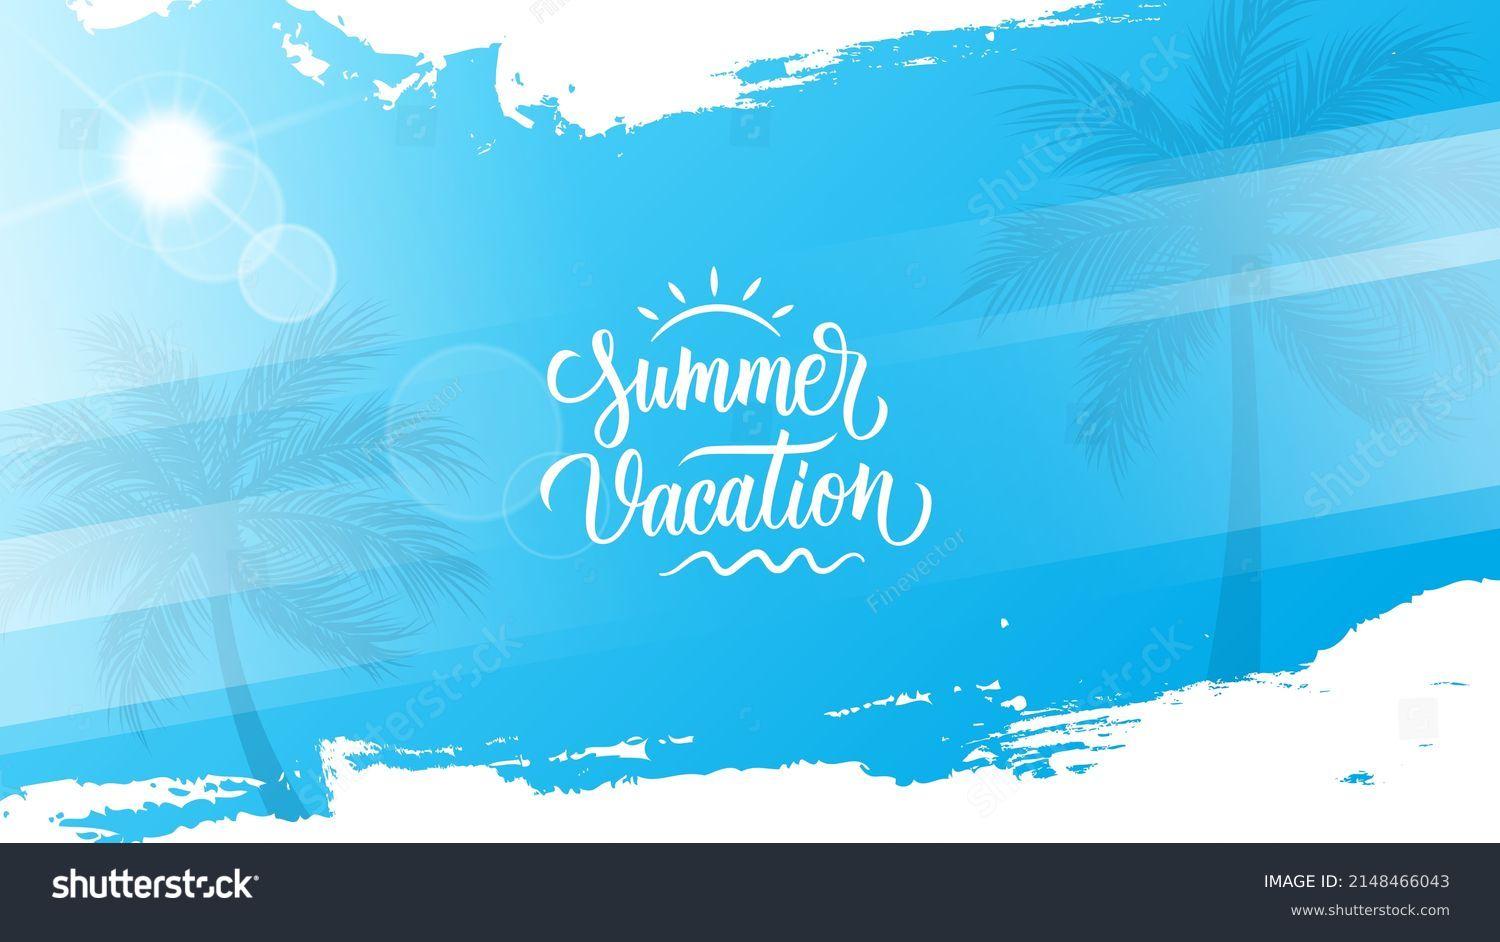 Summertime Image Stock Photos 3d Objects Vectors